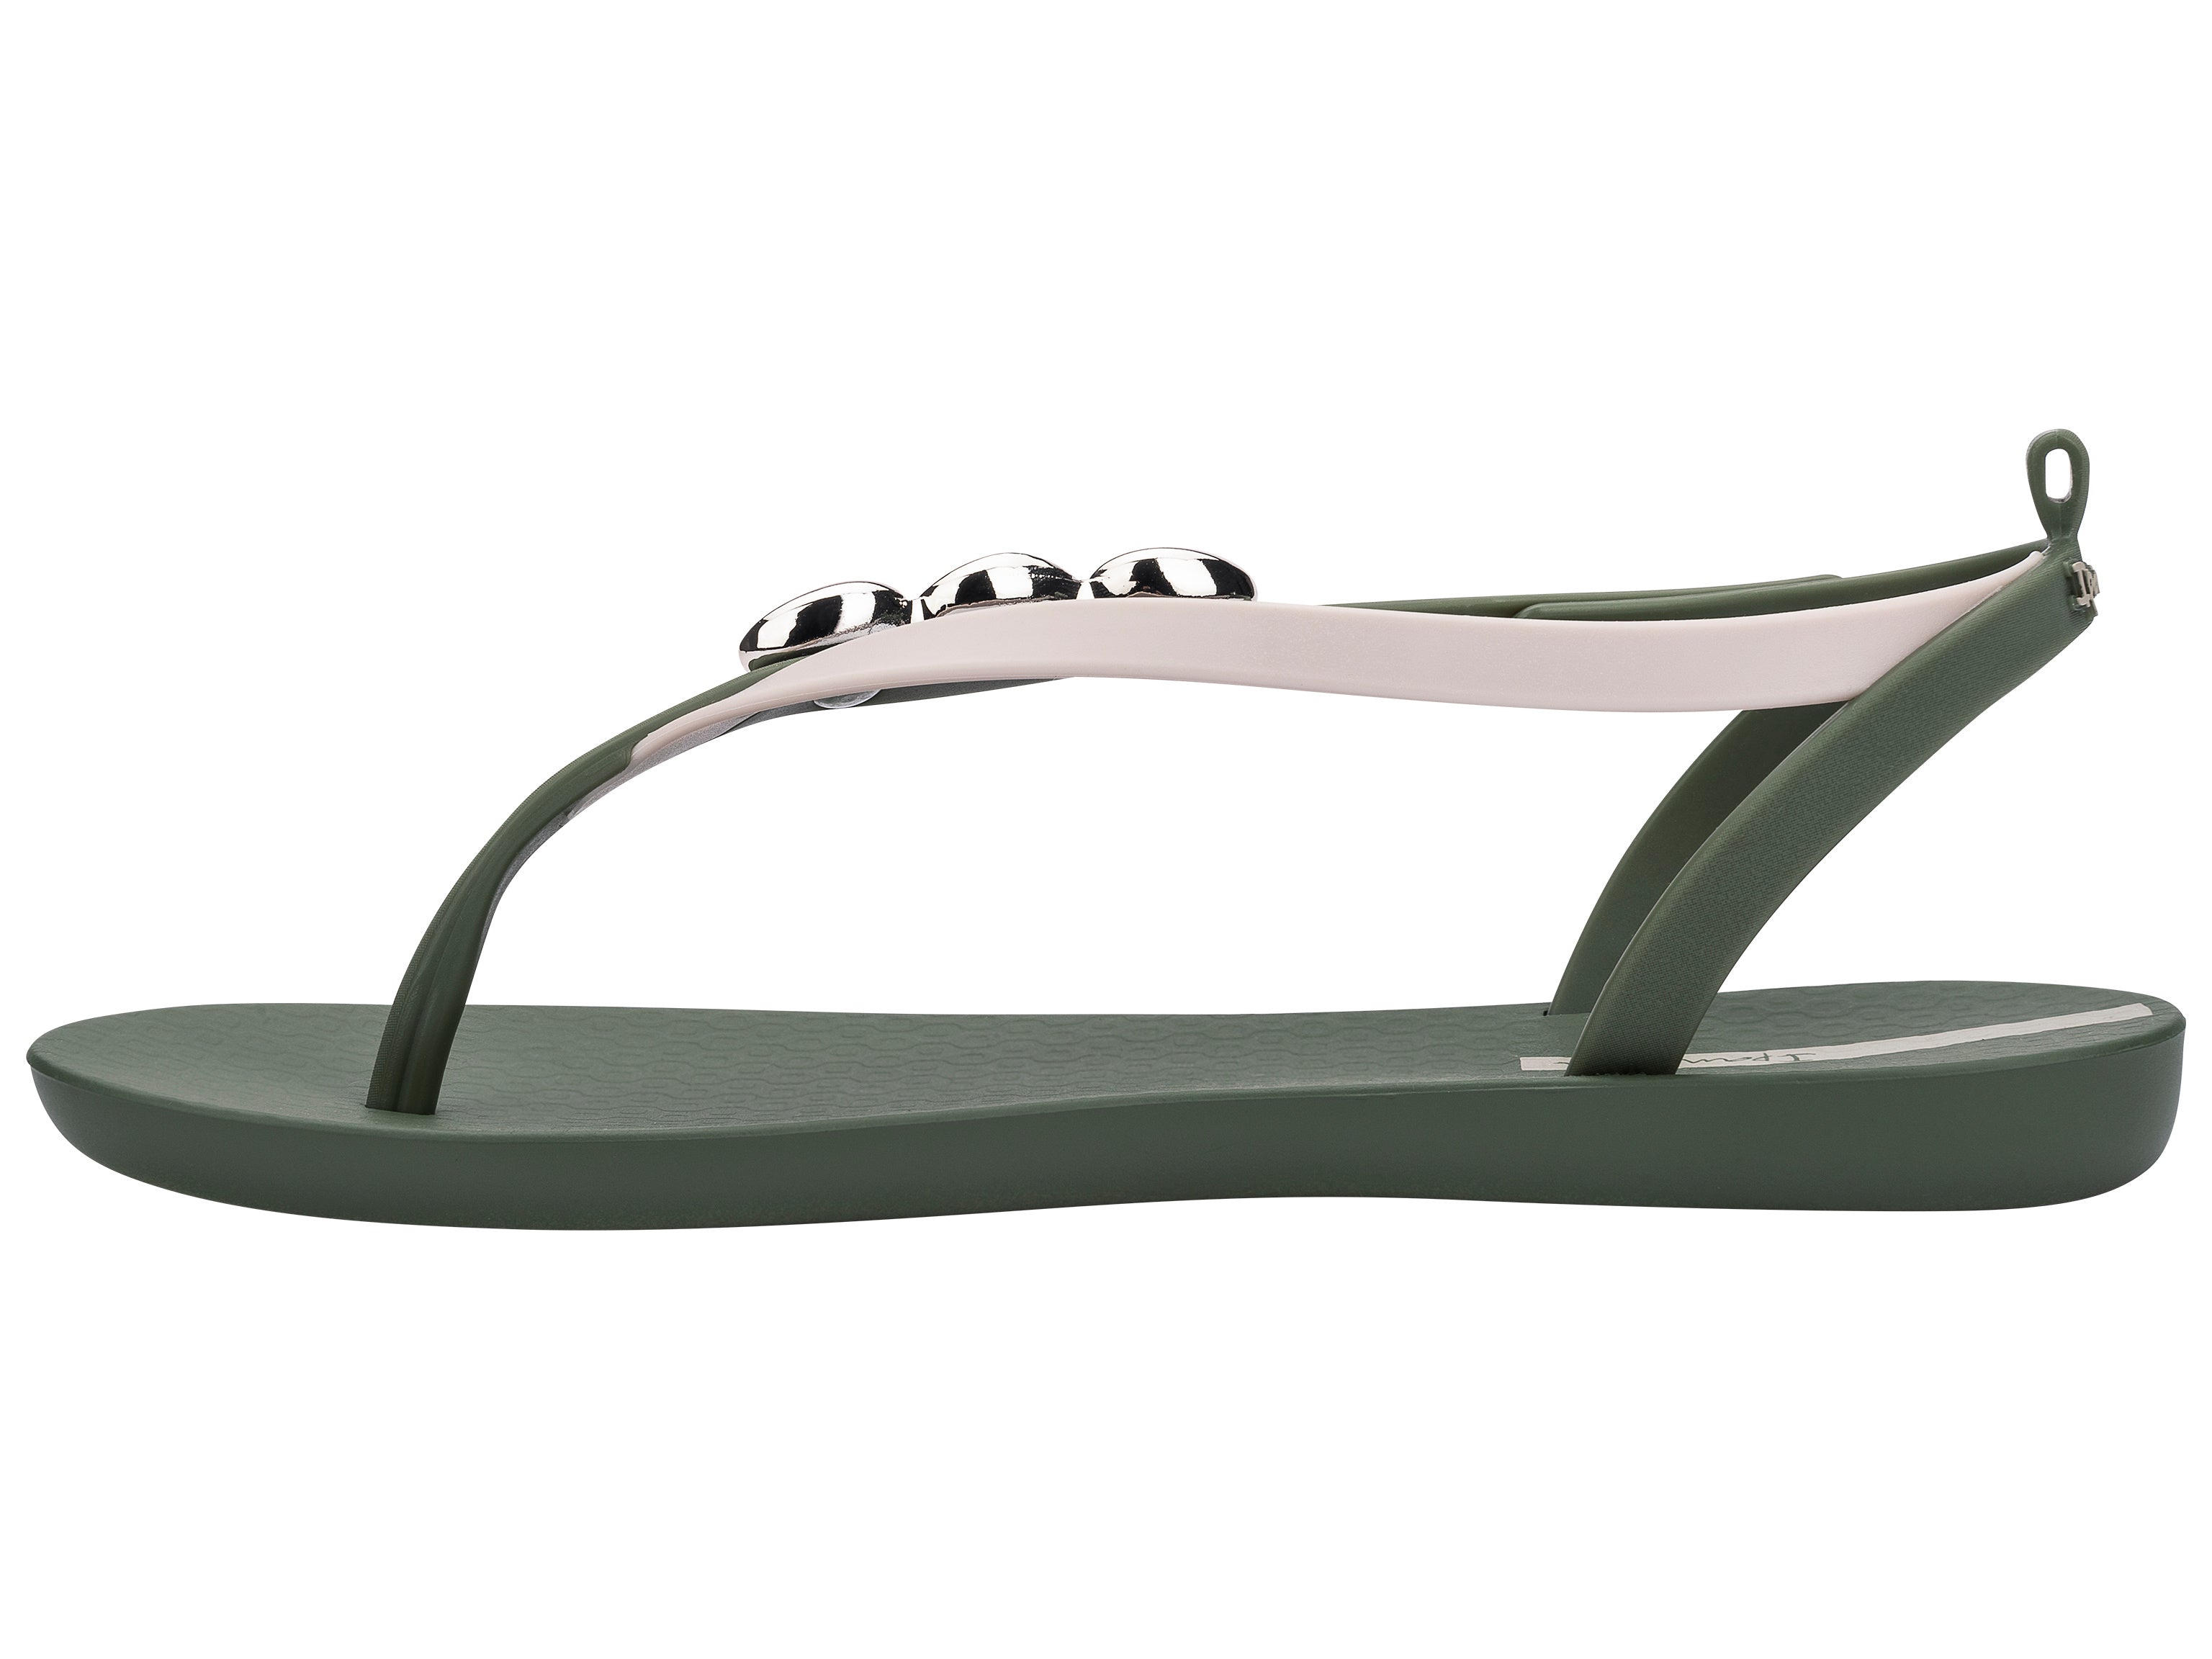 Inner side view of a green Ipanema Salty women's sandal with 3 silver shells on the strap.